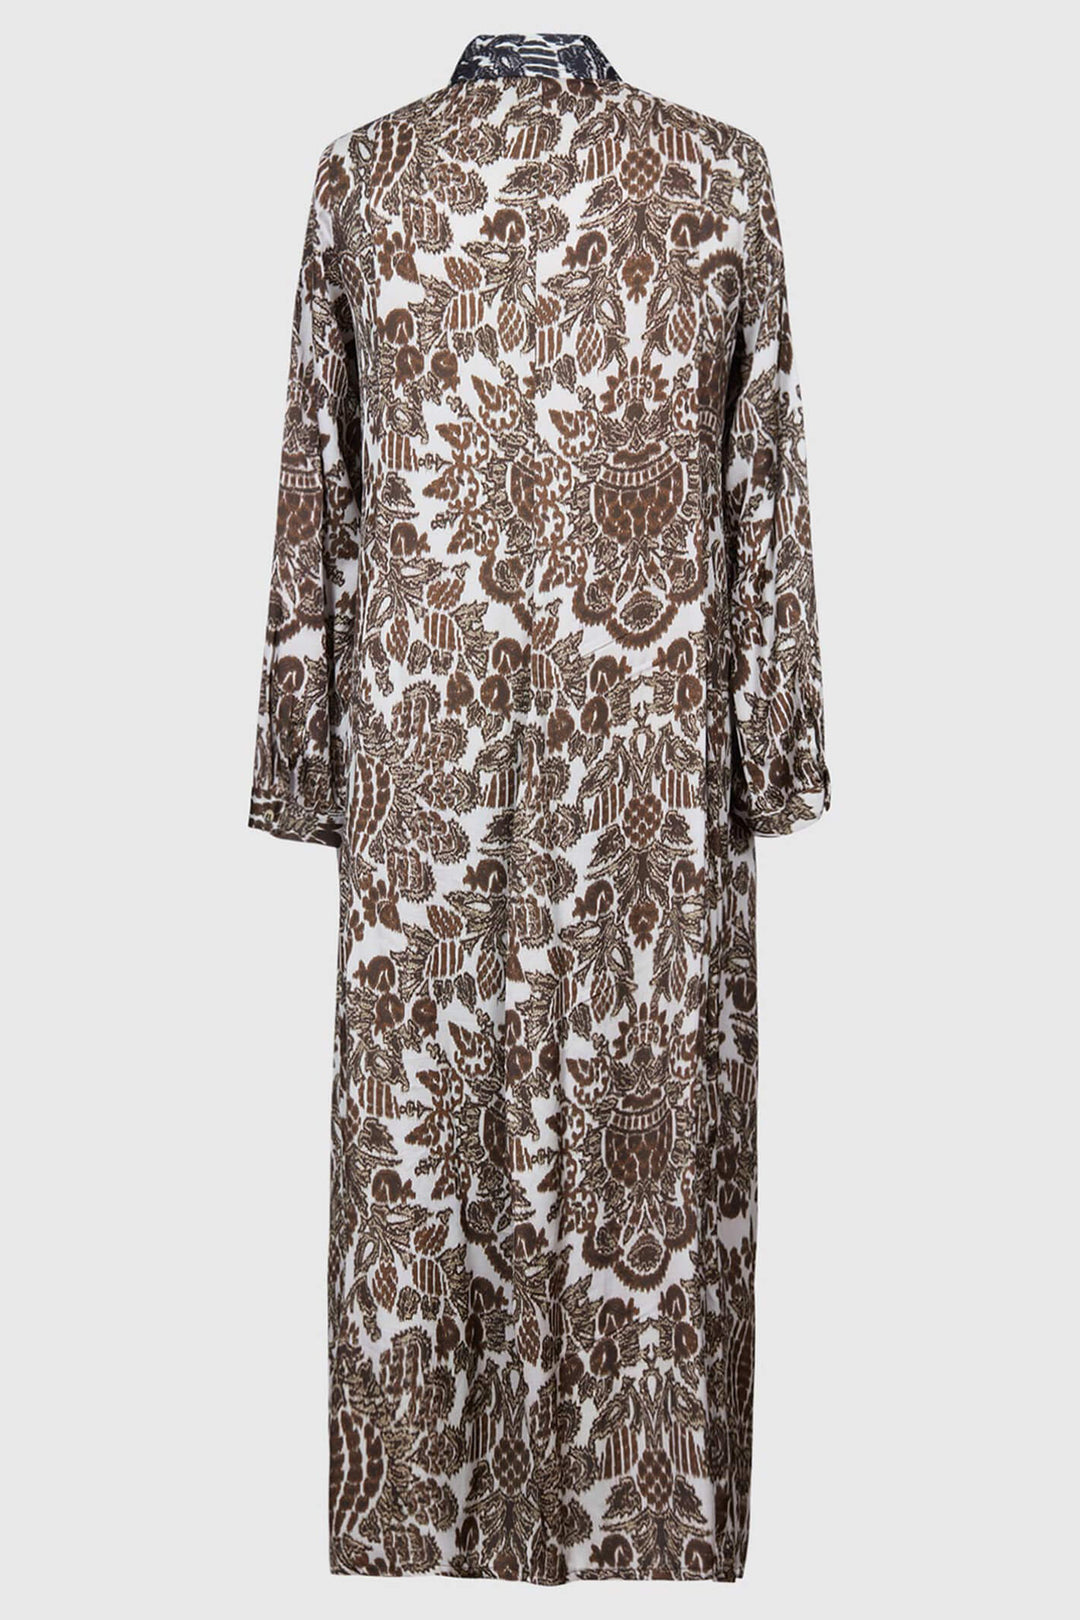 Alembika AD302A Brown Print Long Sleeve Dress - Experience Boutique